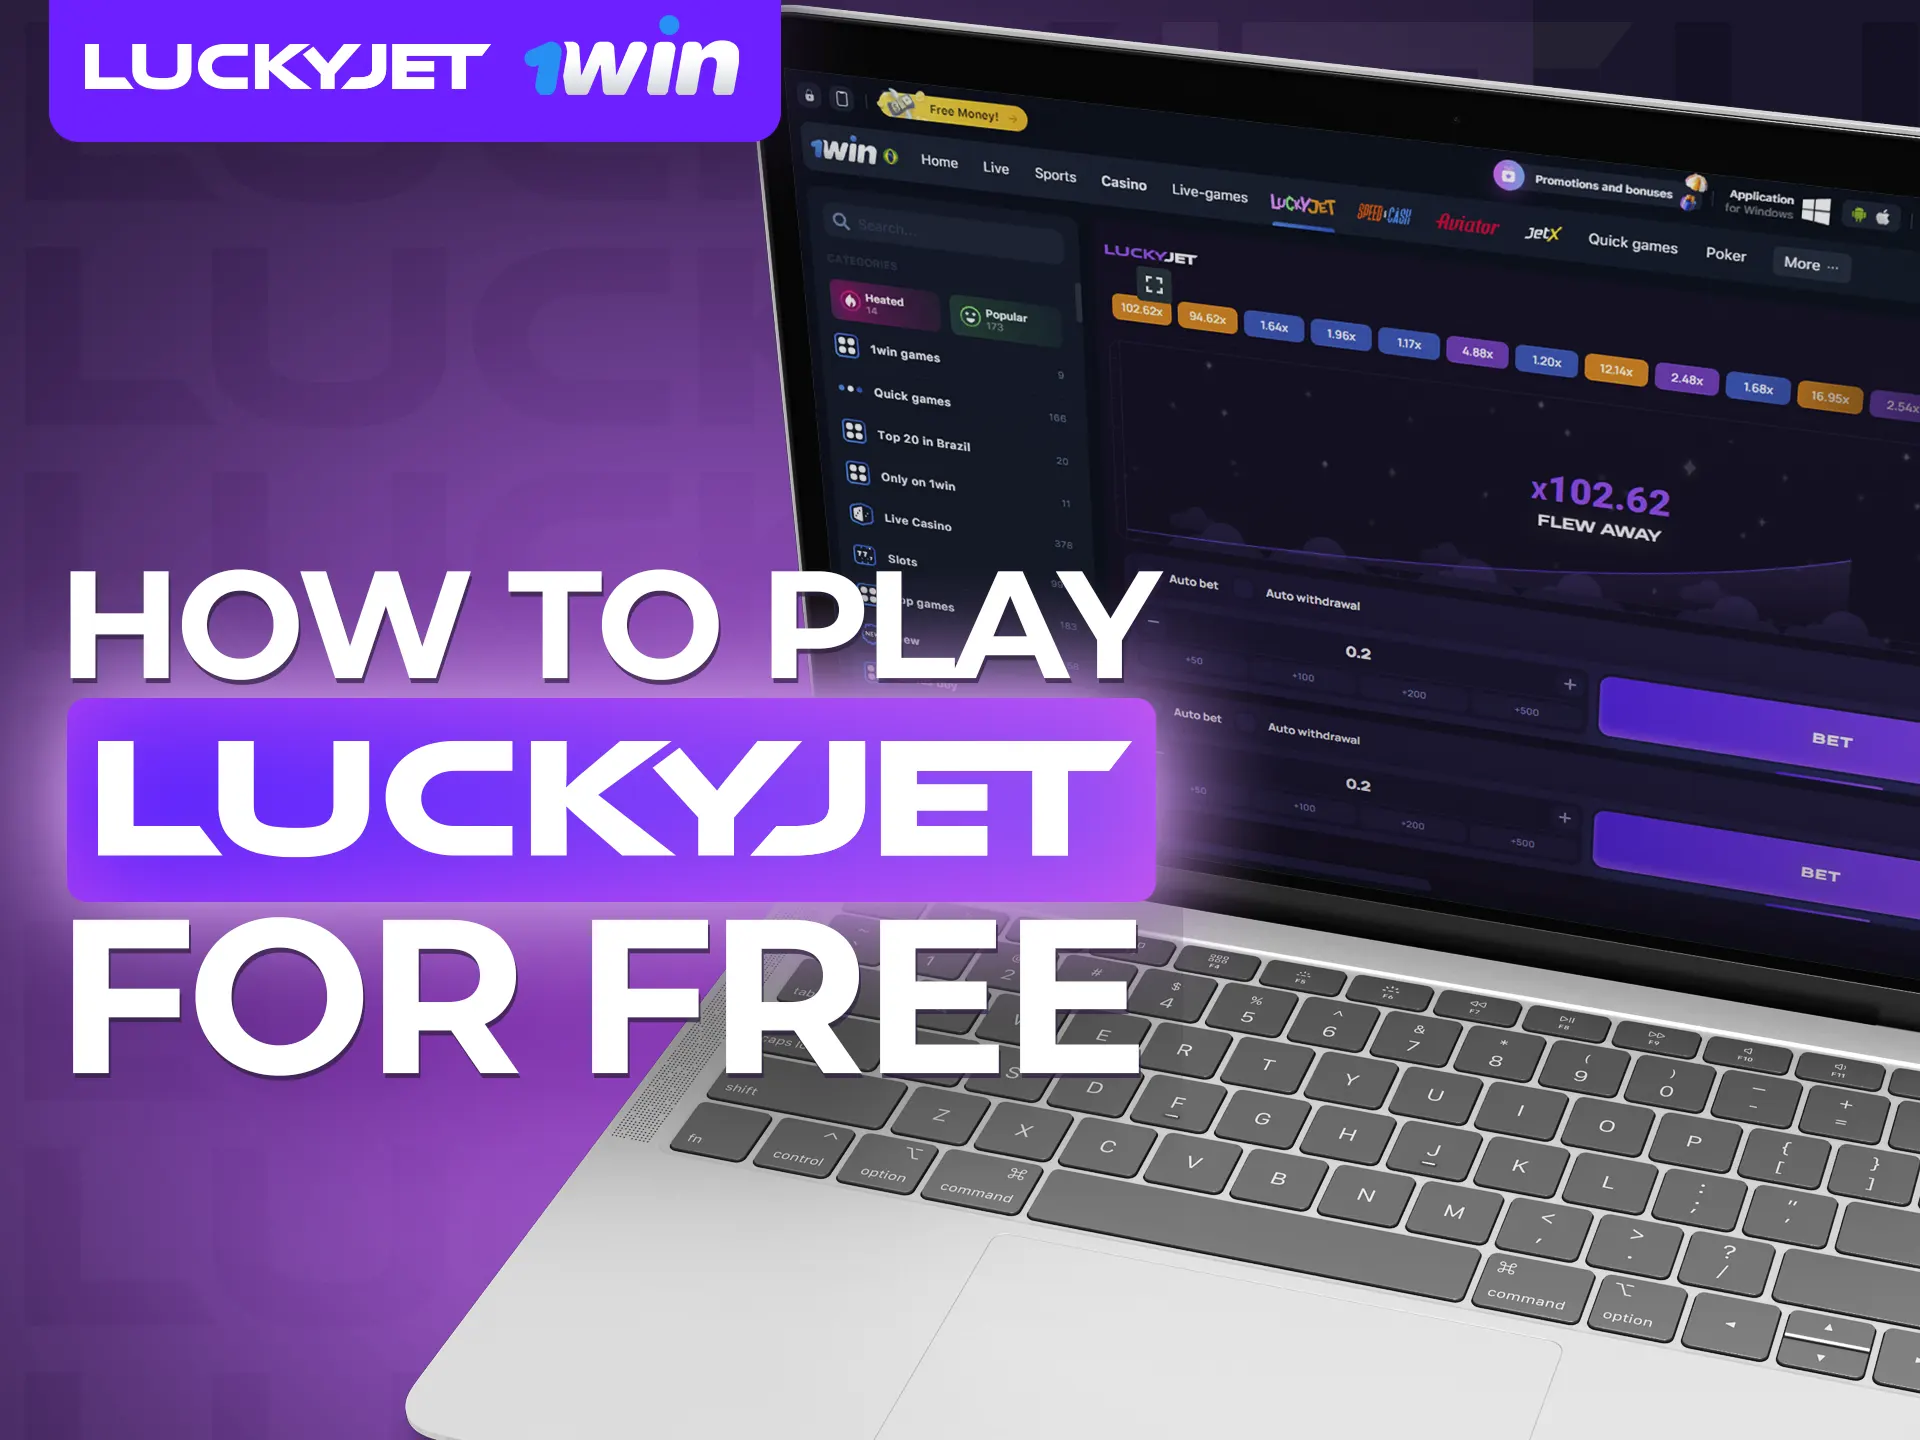 Play Lucky Jet for free with these steps.